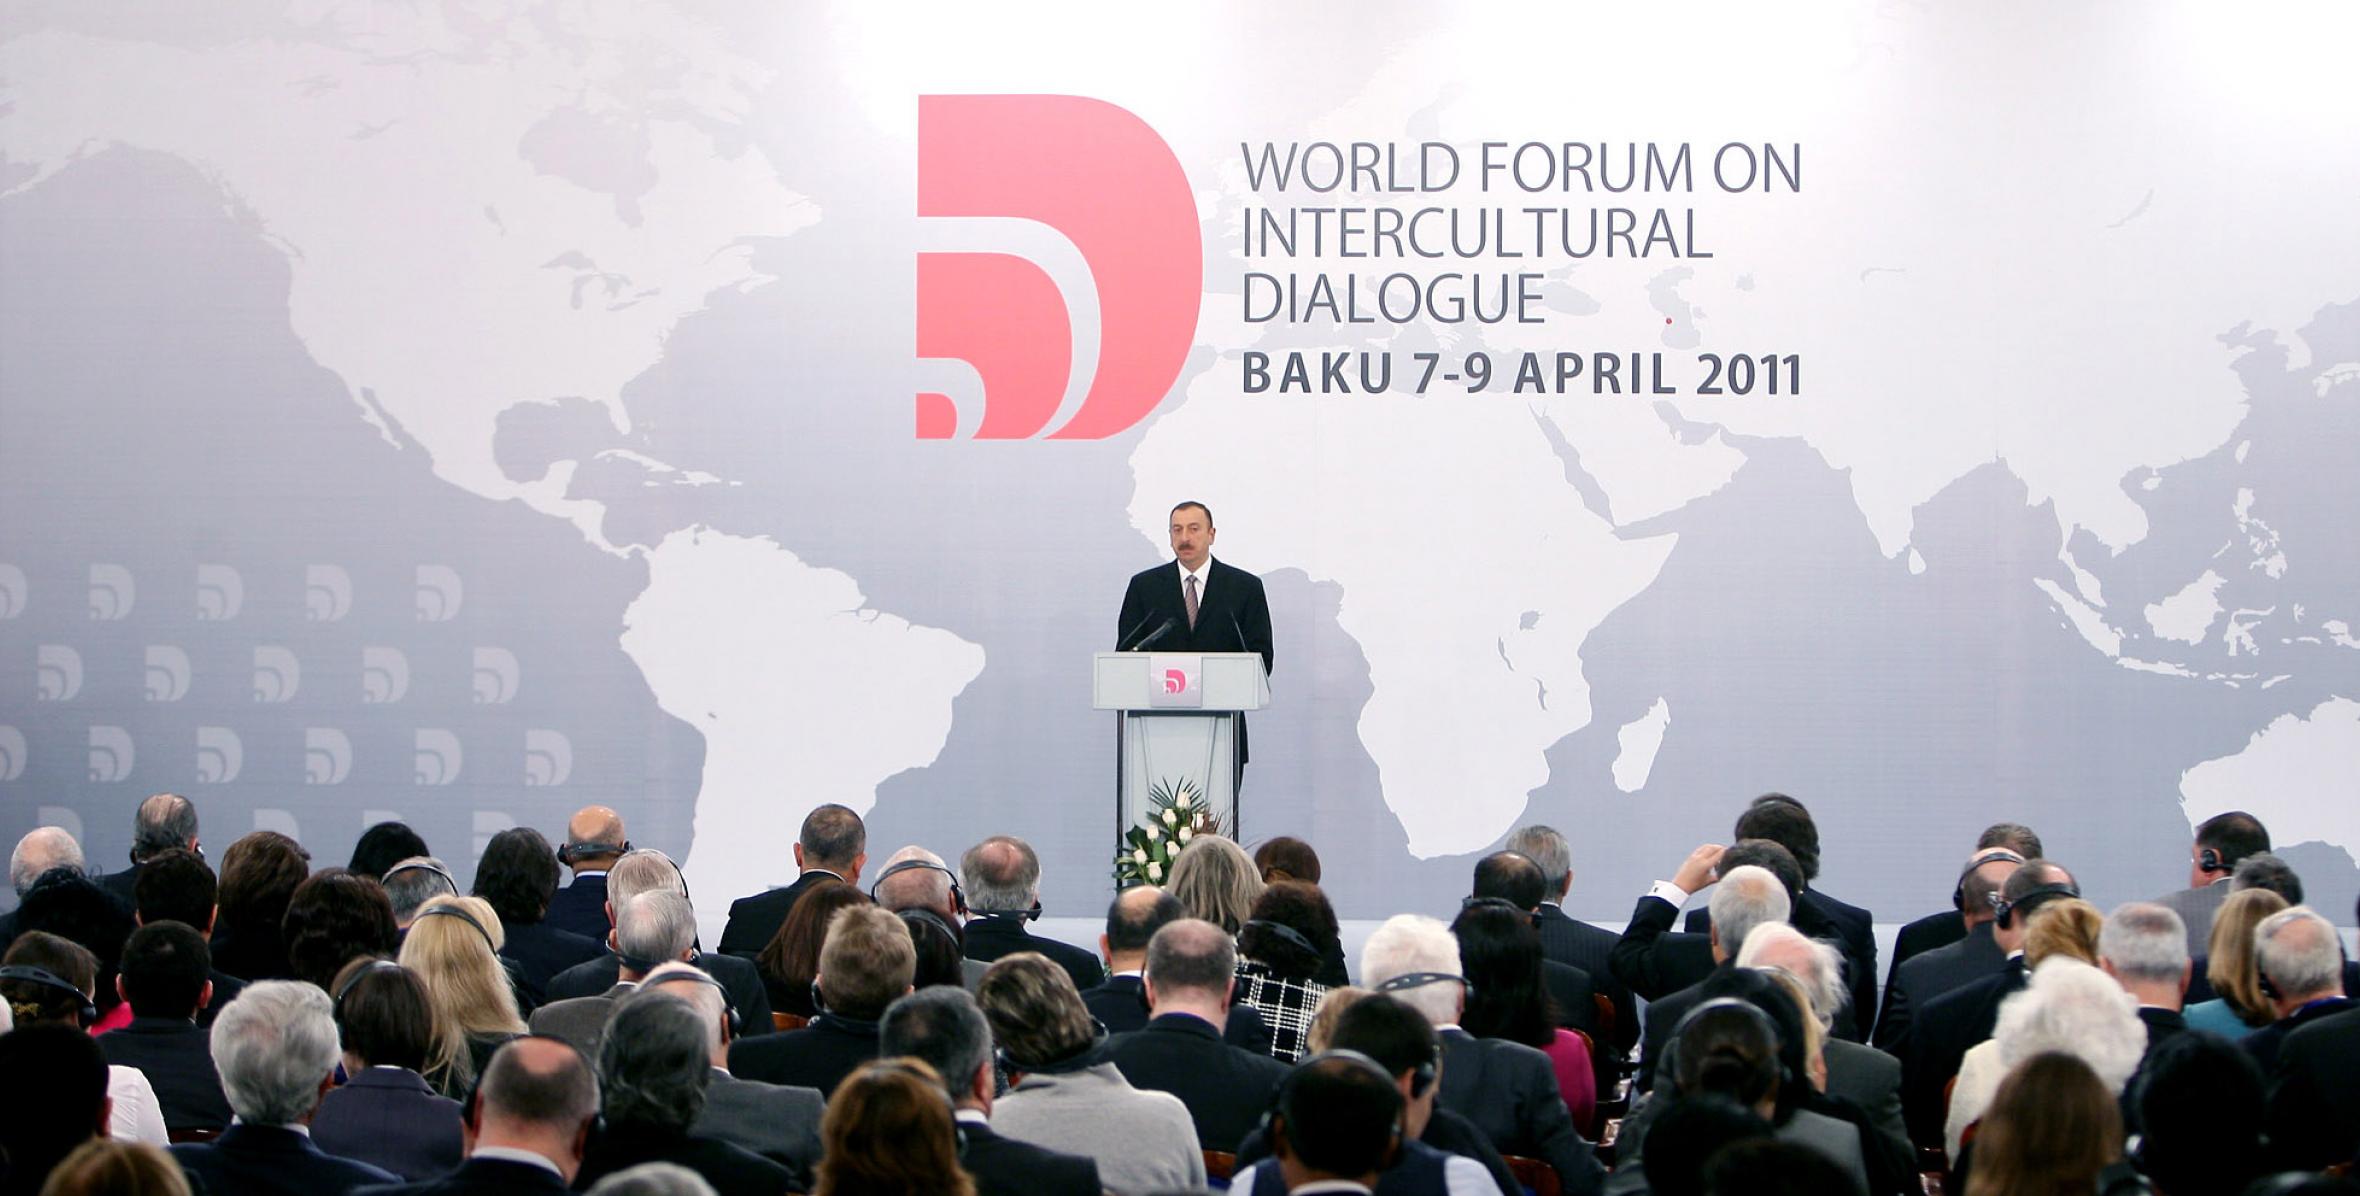 Ilham Aliyev attended the opening ceremony of the World Forum on Intercultural Dialogue